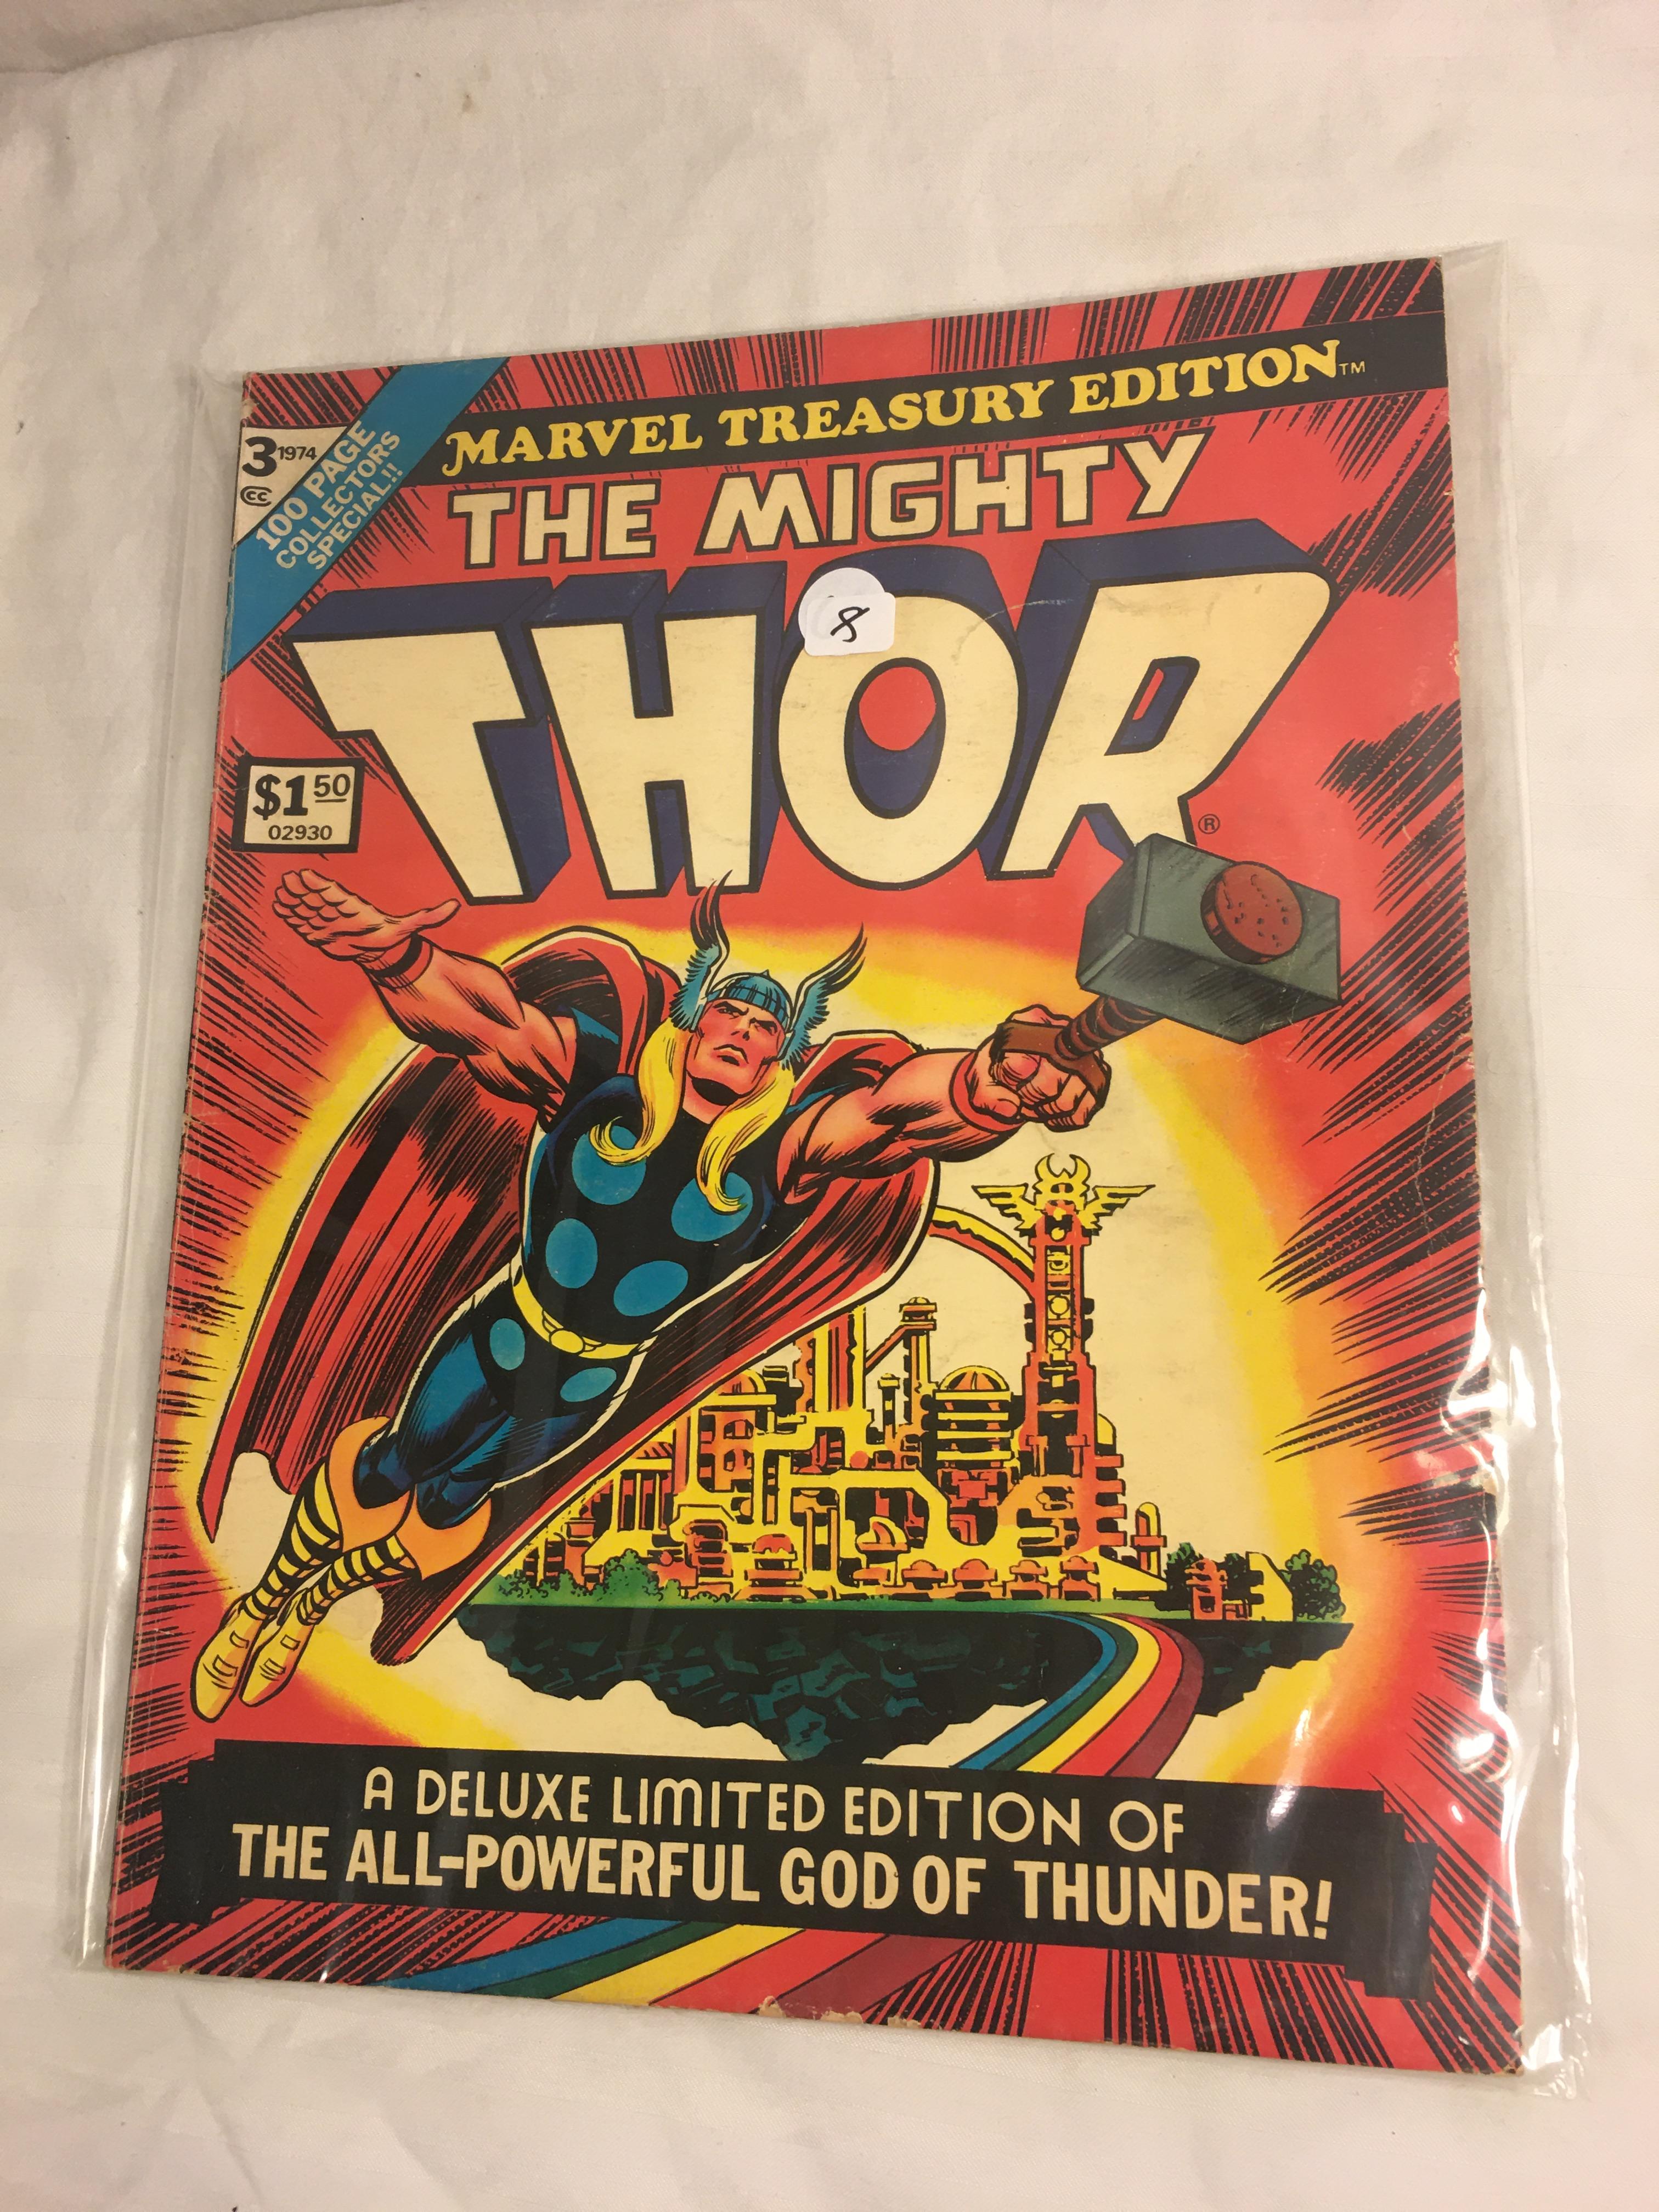 Collector Vintage 1974 Marvel Treasury Edition The Mighty Thor Deluxe Ltd. Edt Comic